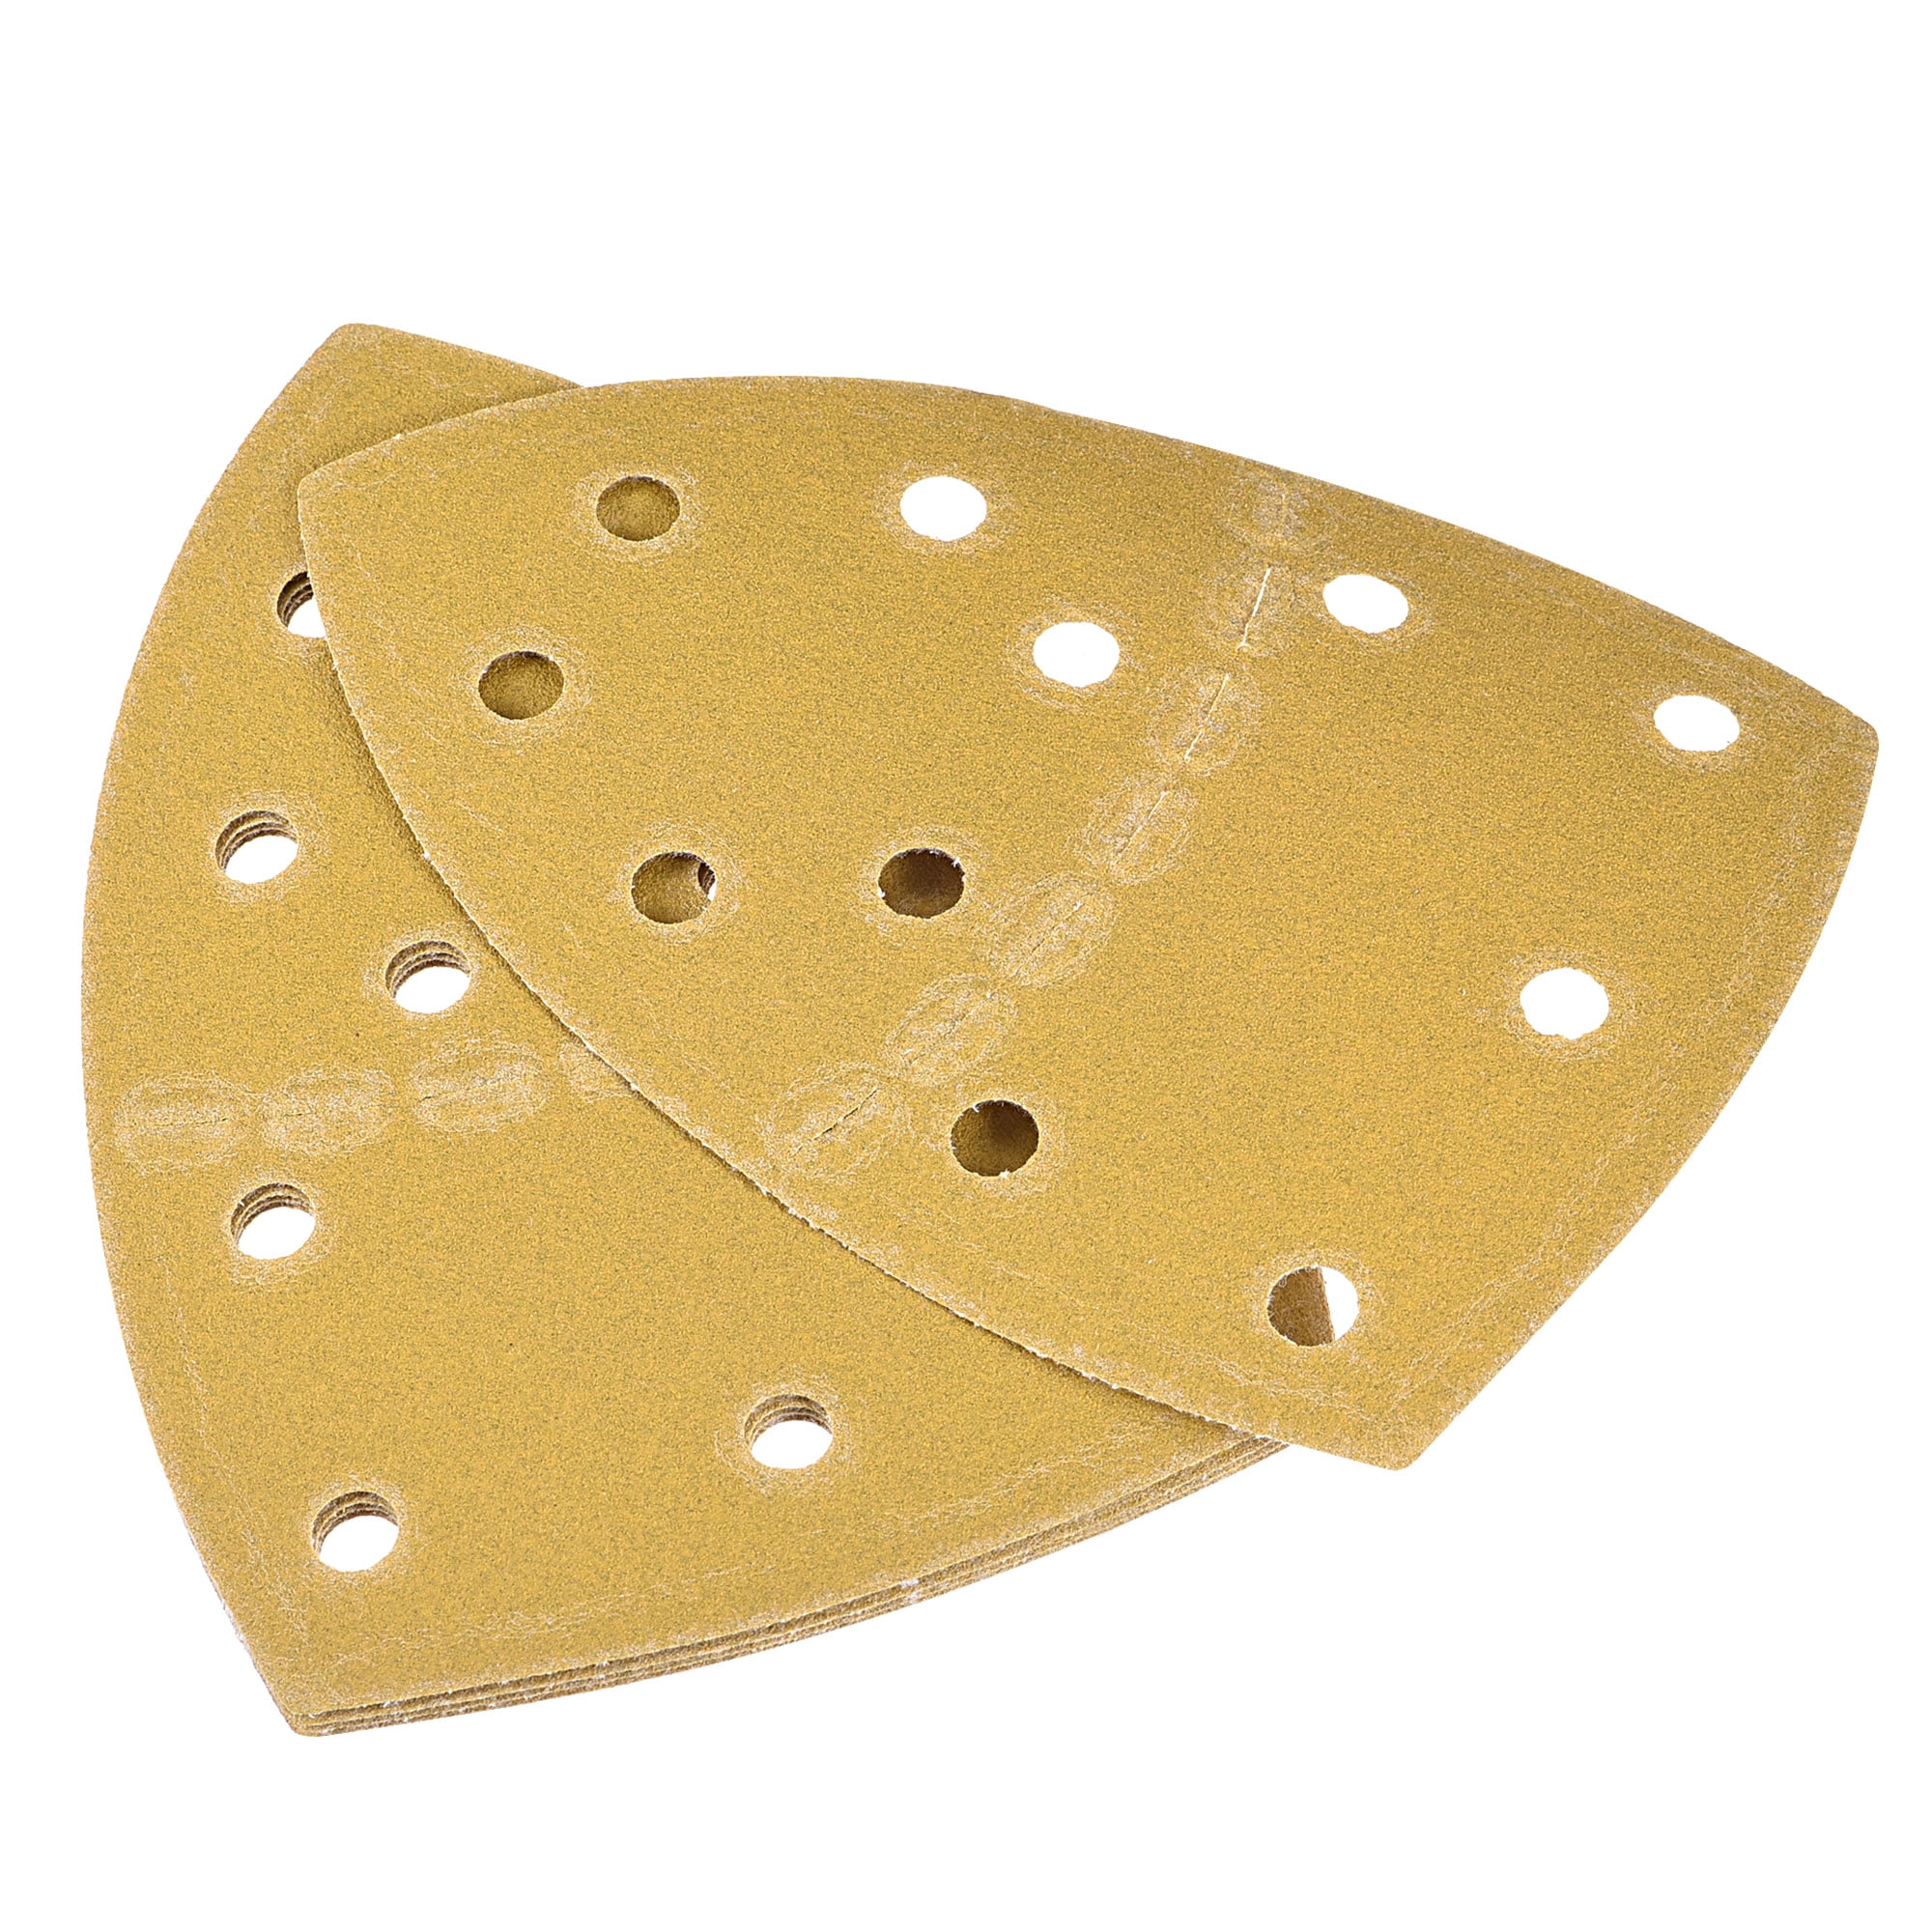 uxcell 50 Pcs 3.5 Inch Hook and Loop Sanding Discs Pads 320 Grit 6-Hole Triangle Sandpaper 